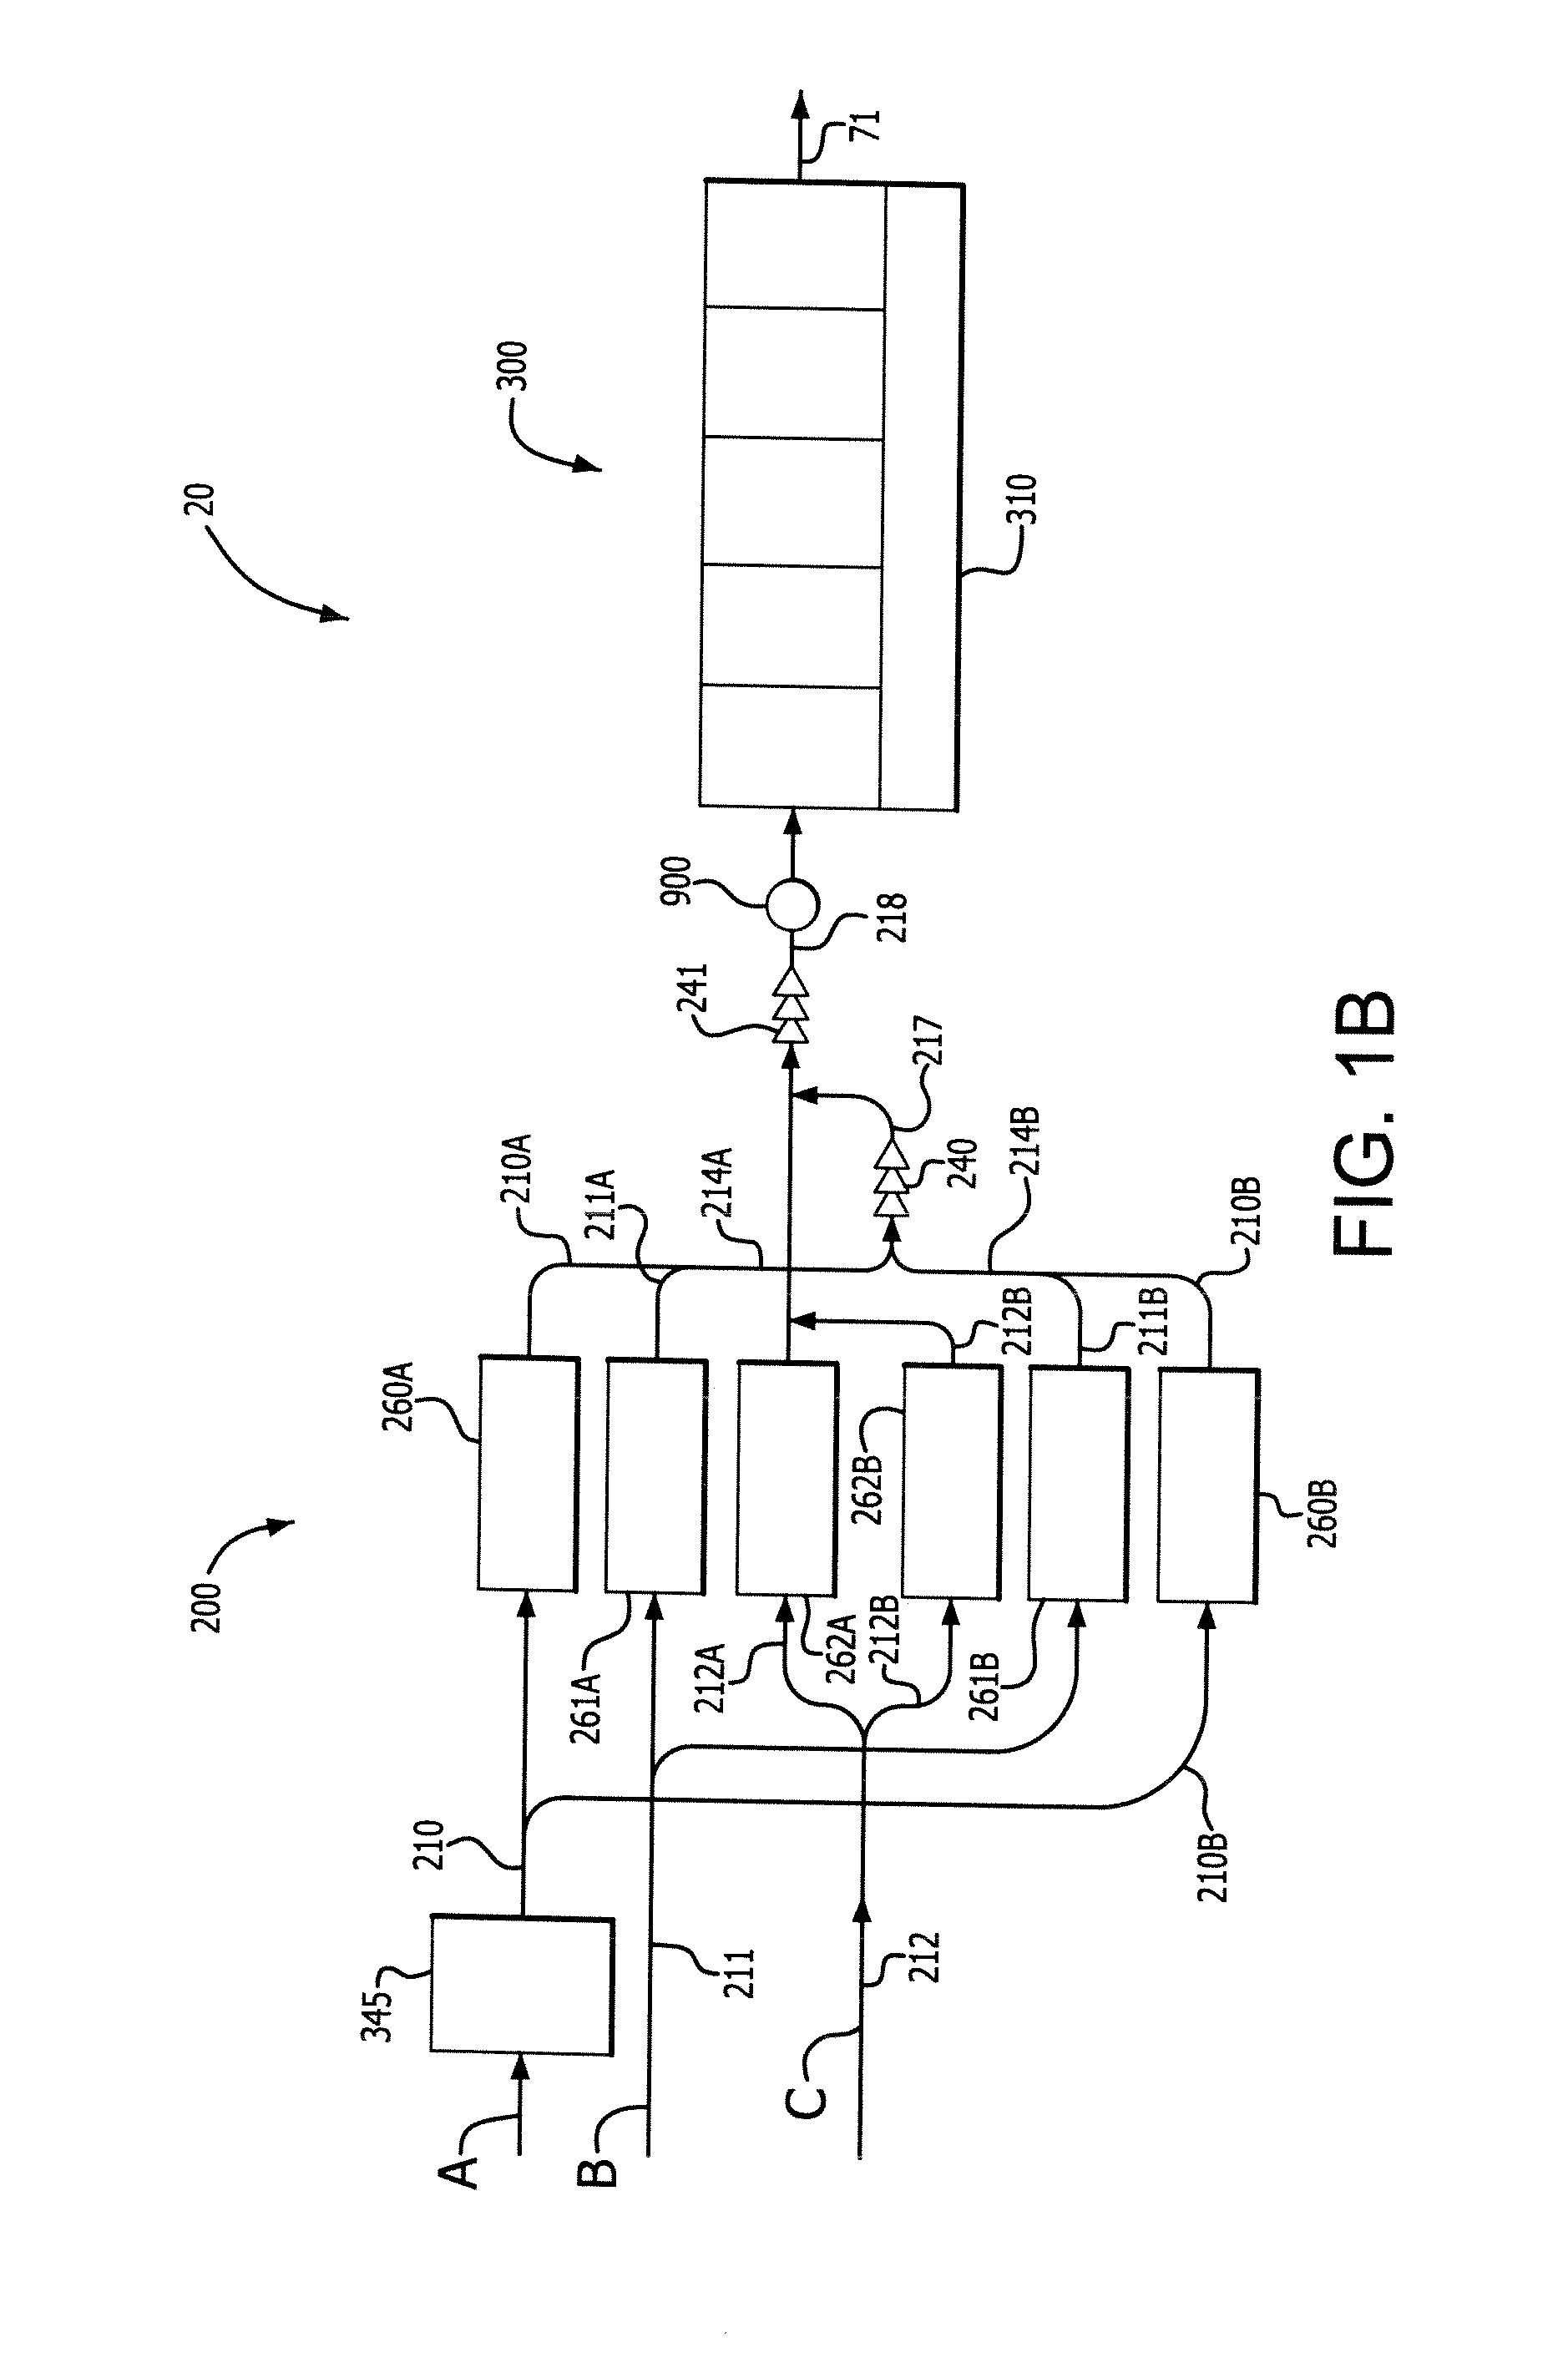 Slurry Supply and/or Chemical Blend Supply Apparatuses, Processes, Methods of Use and Methods of Manufacture